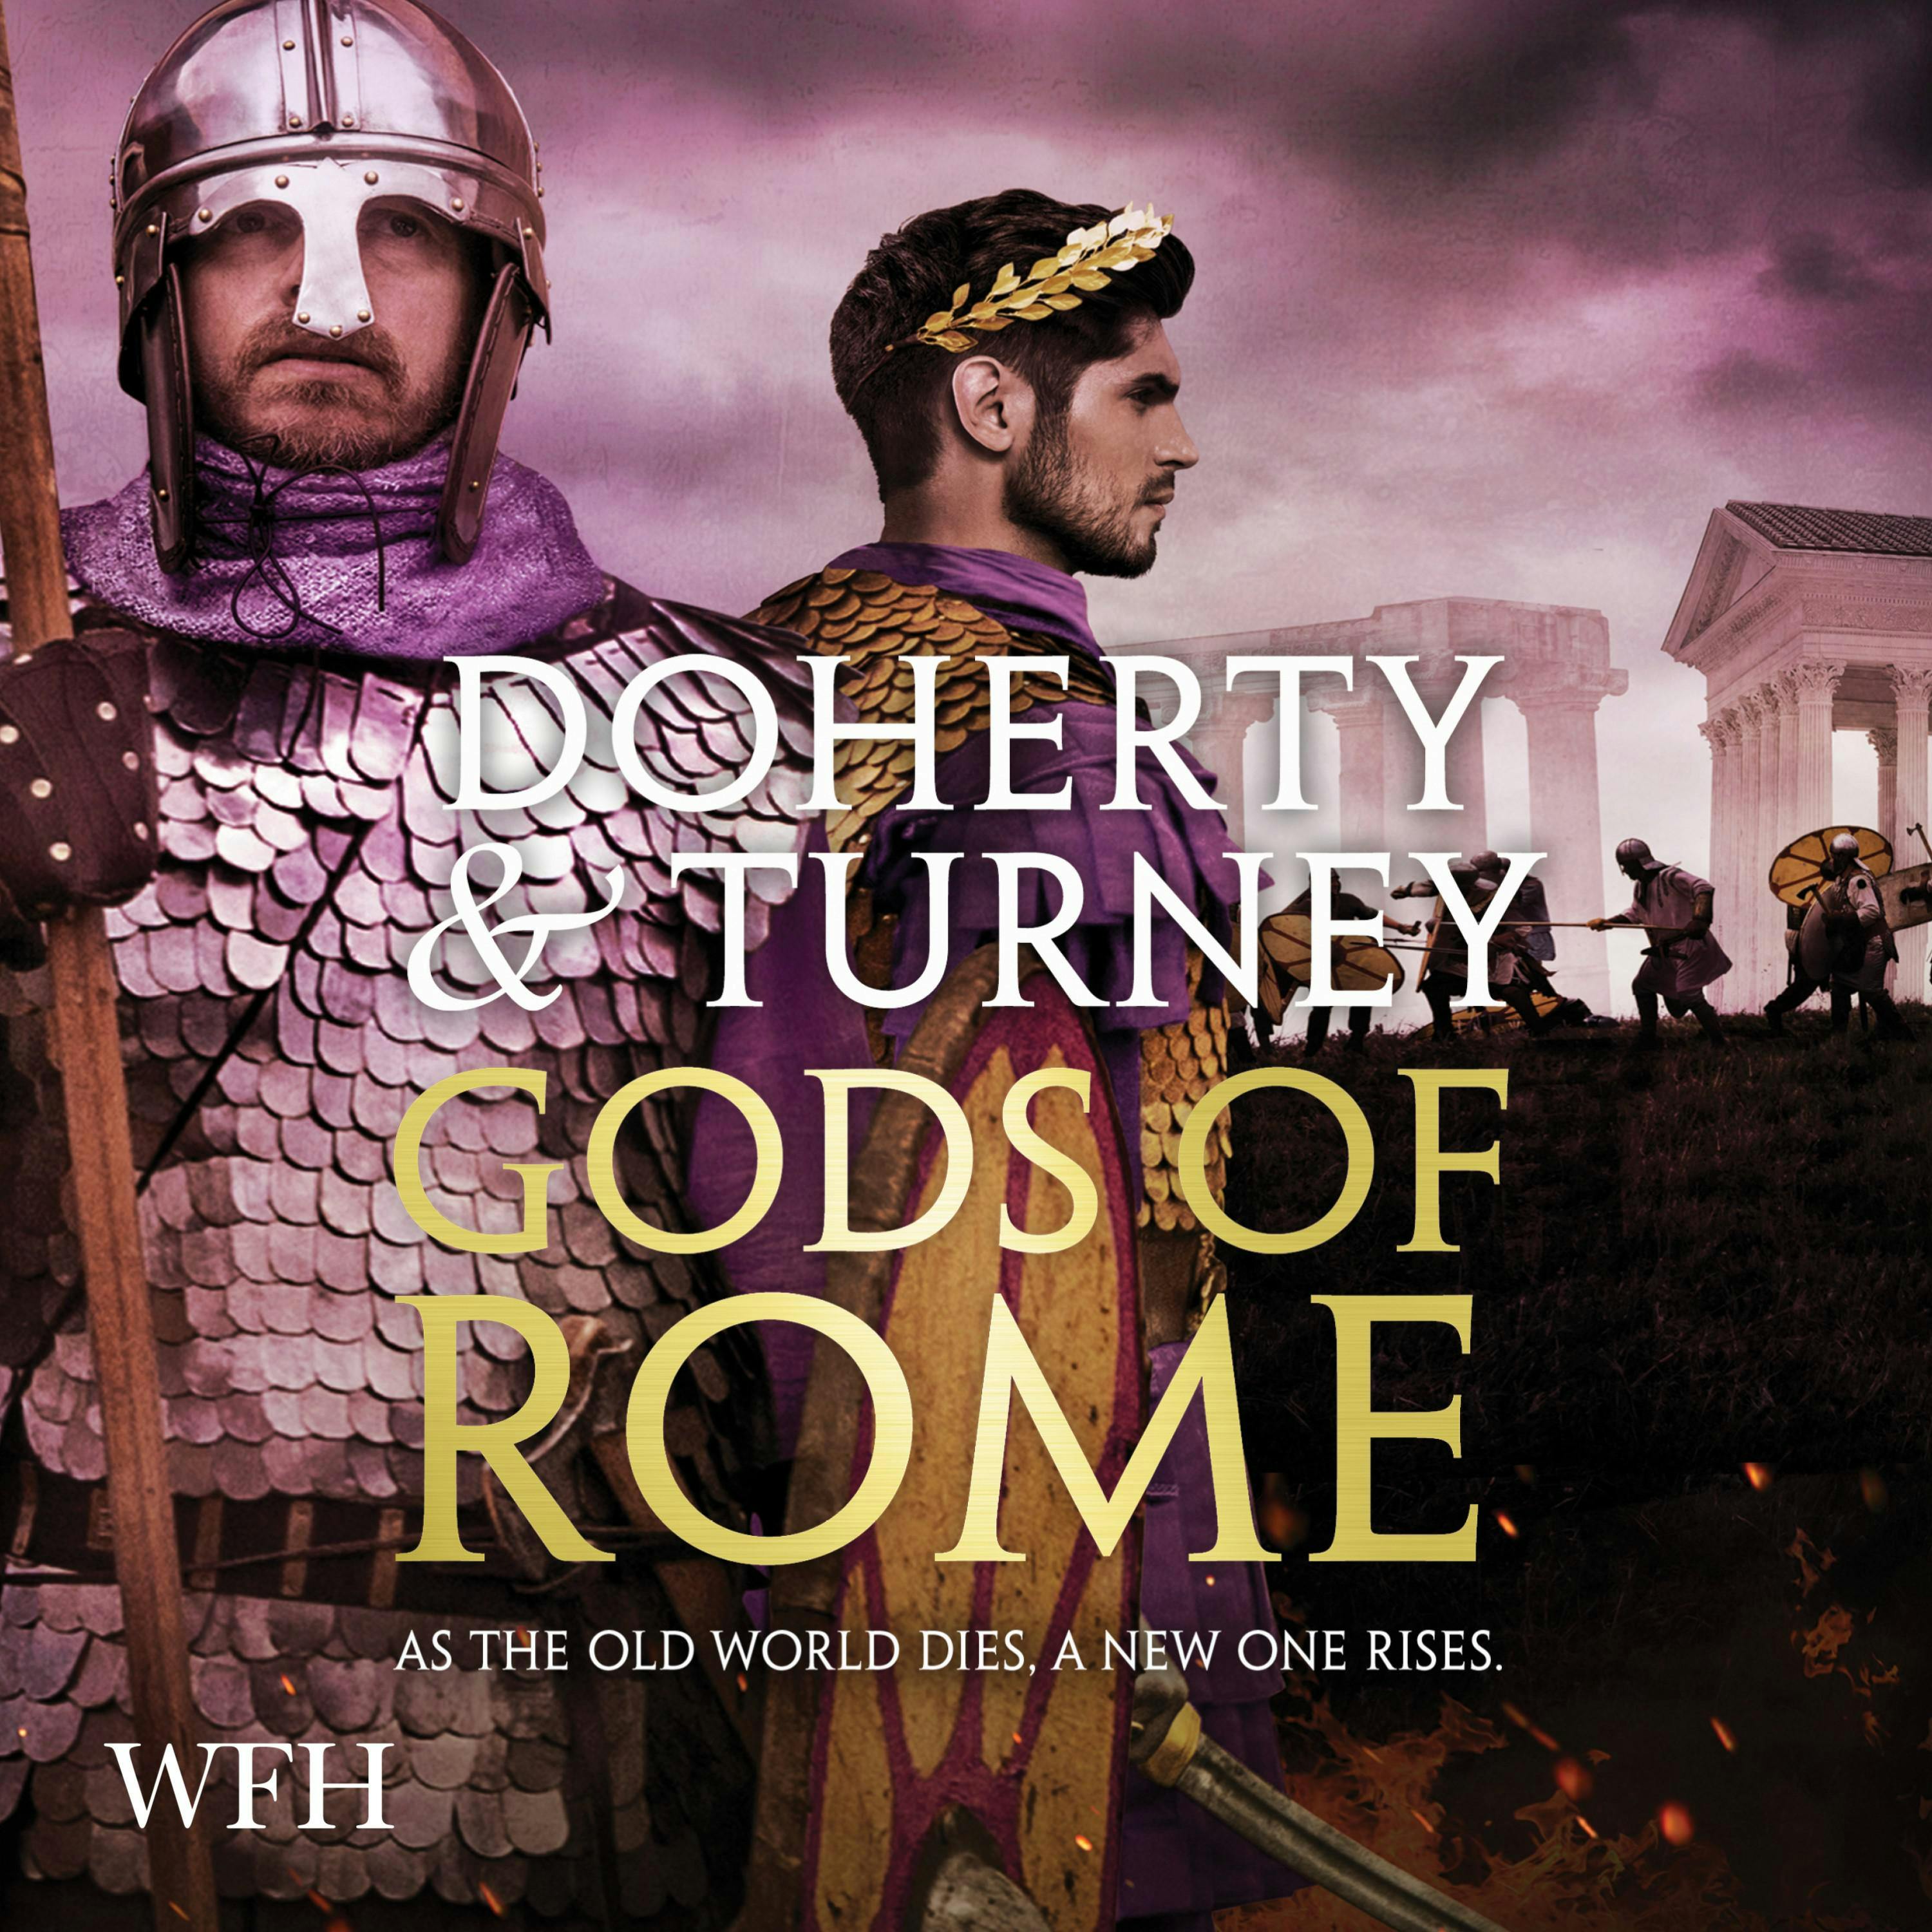 Gods of Rome: Rise of Emperors book 3 - undefined